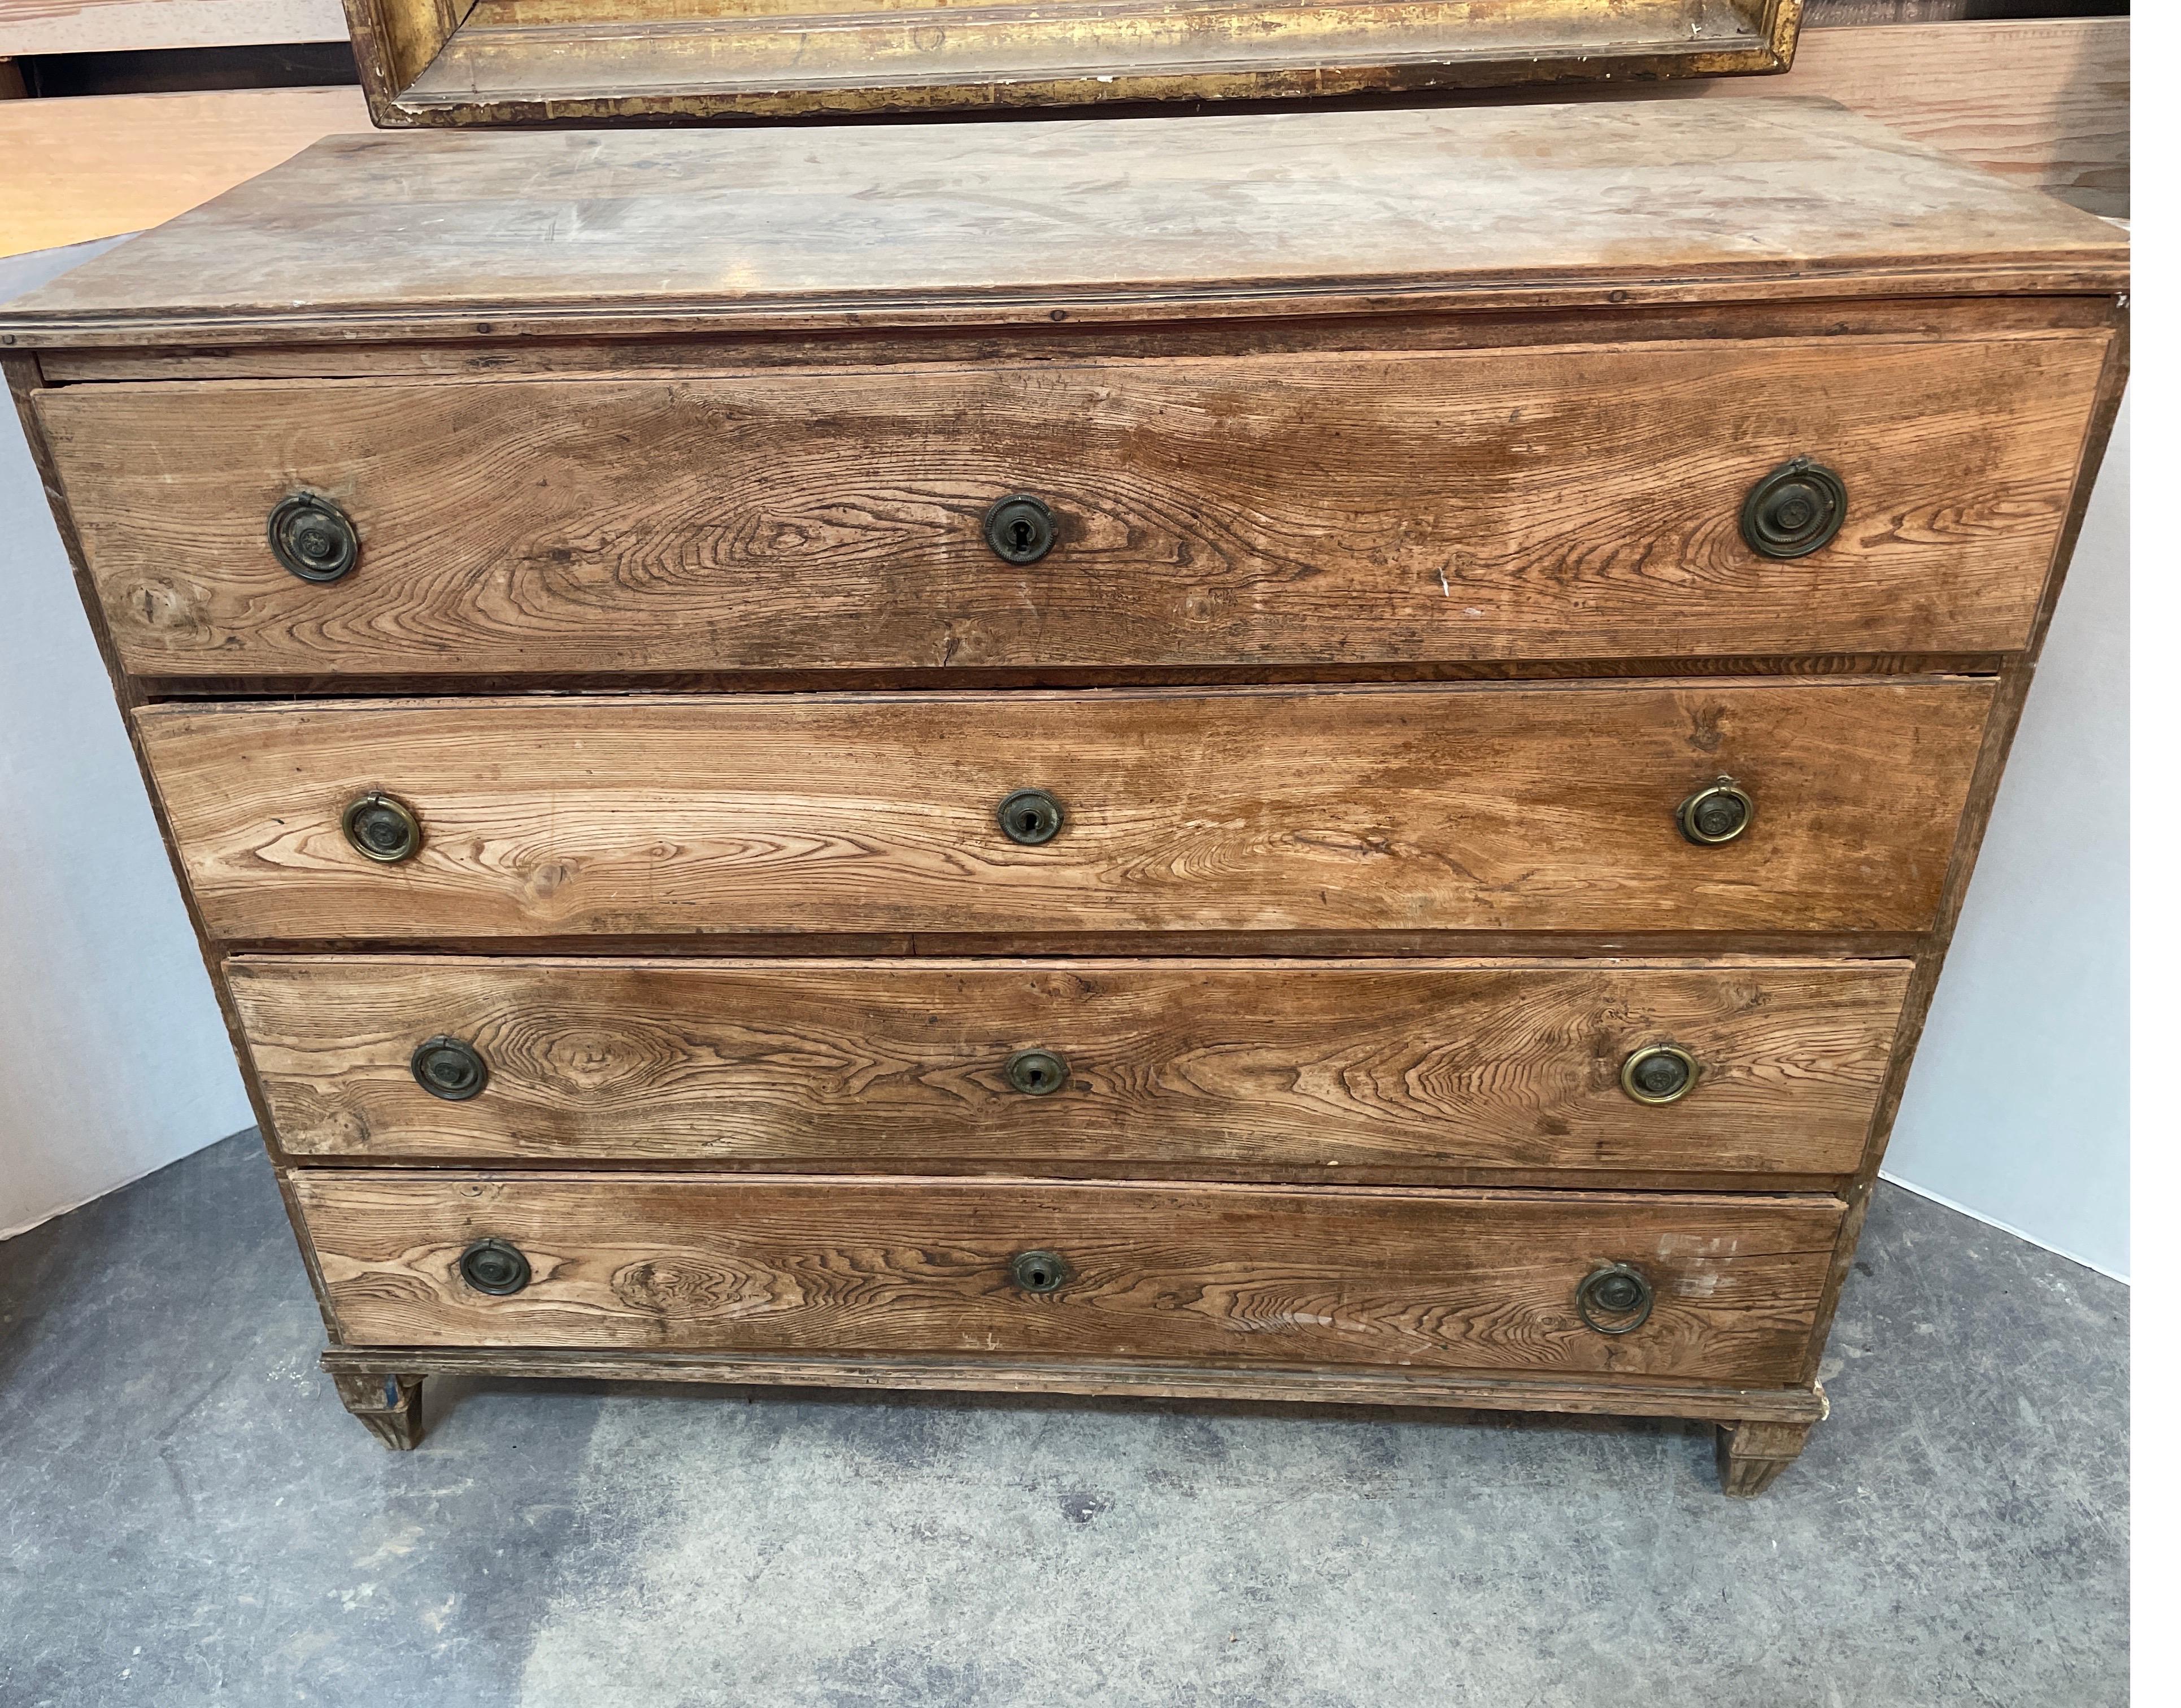 This is a Gustavian, Swedish pine natural patina finish 4 drawer chest from the 1890s. It's is great working condition. It's perfect for that casual look where you want a simple, functional chest.